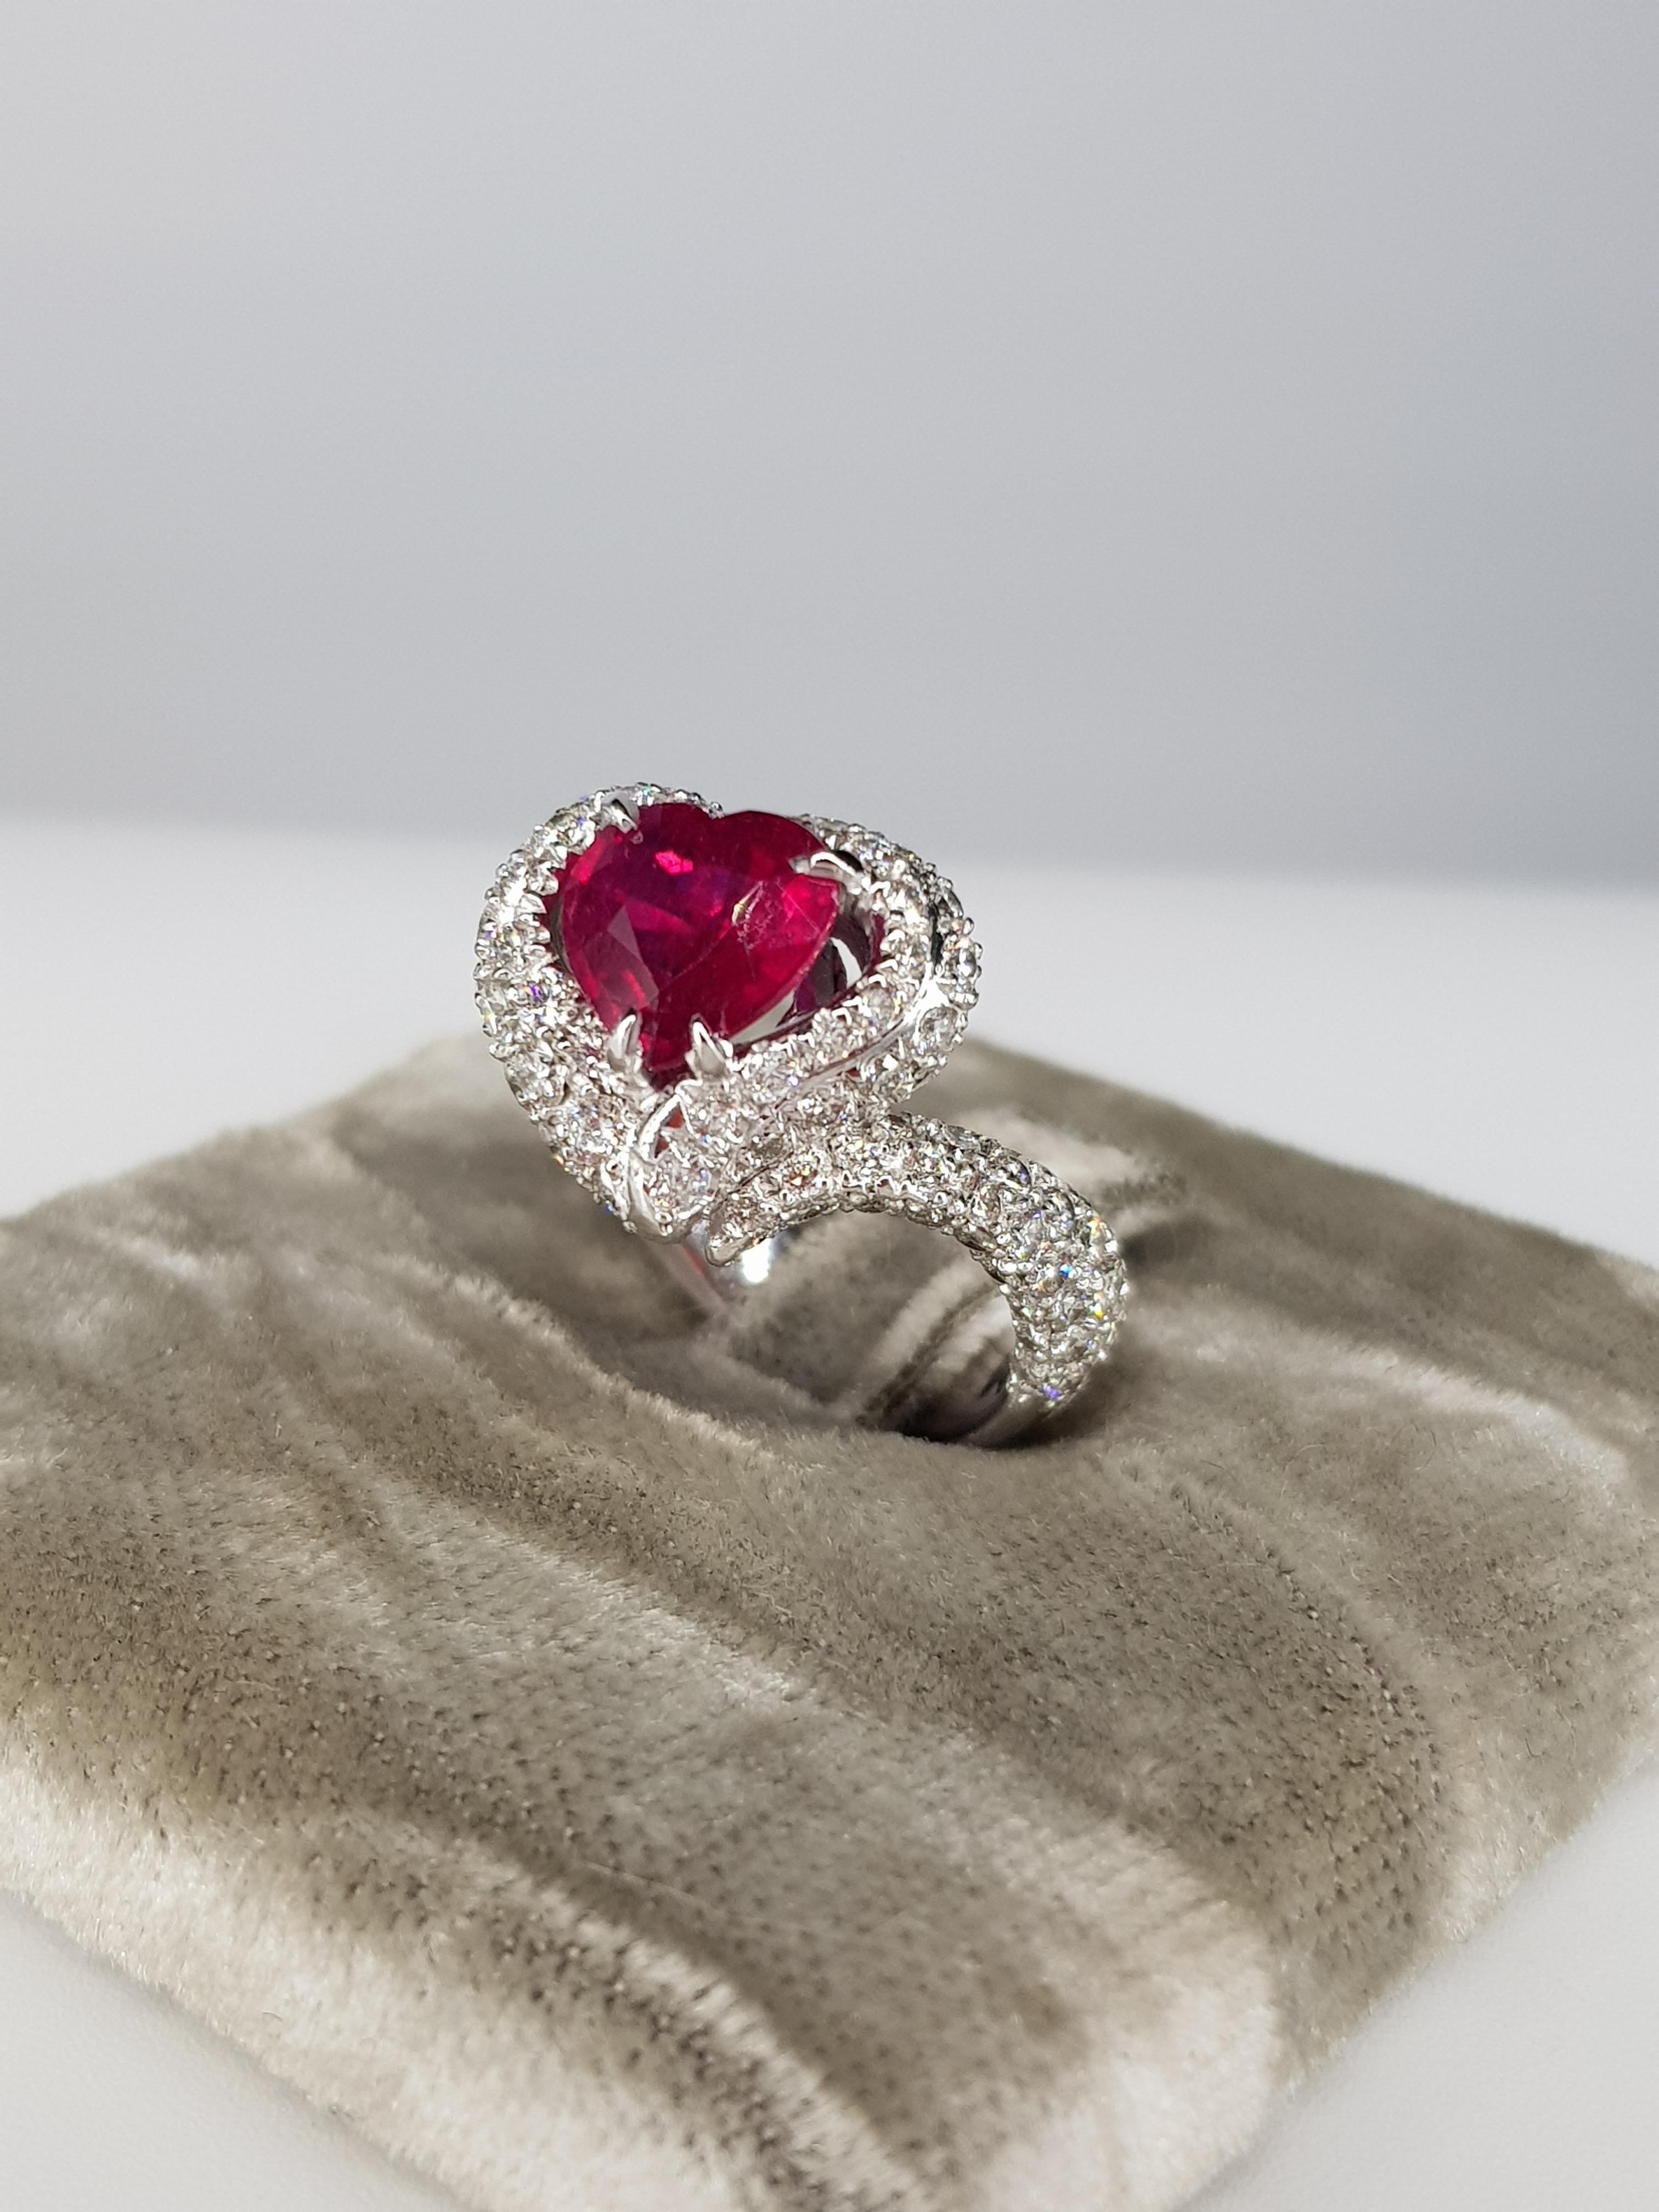 2.04 carats Heart Shaped Ruby set in 18 kt White Gold and surrounded by a pavé of 2.24 cts of White Diamonds, G Color, VVS1 Clarity
The Heart Shape Ruby is certainly the most Romantic of all stones...  for an unforgettable present !!
